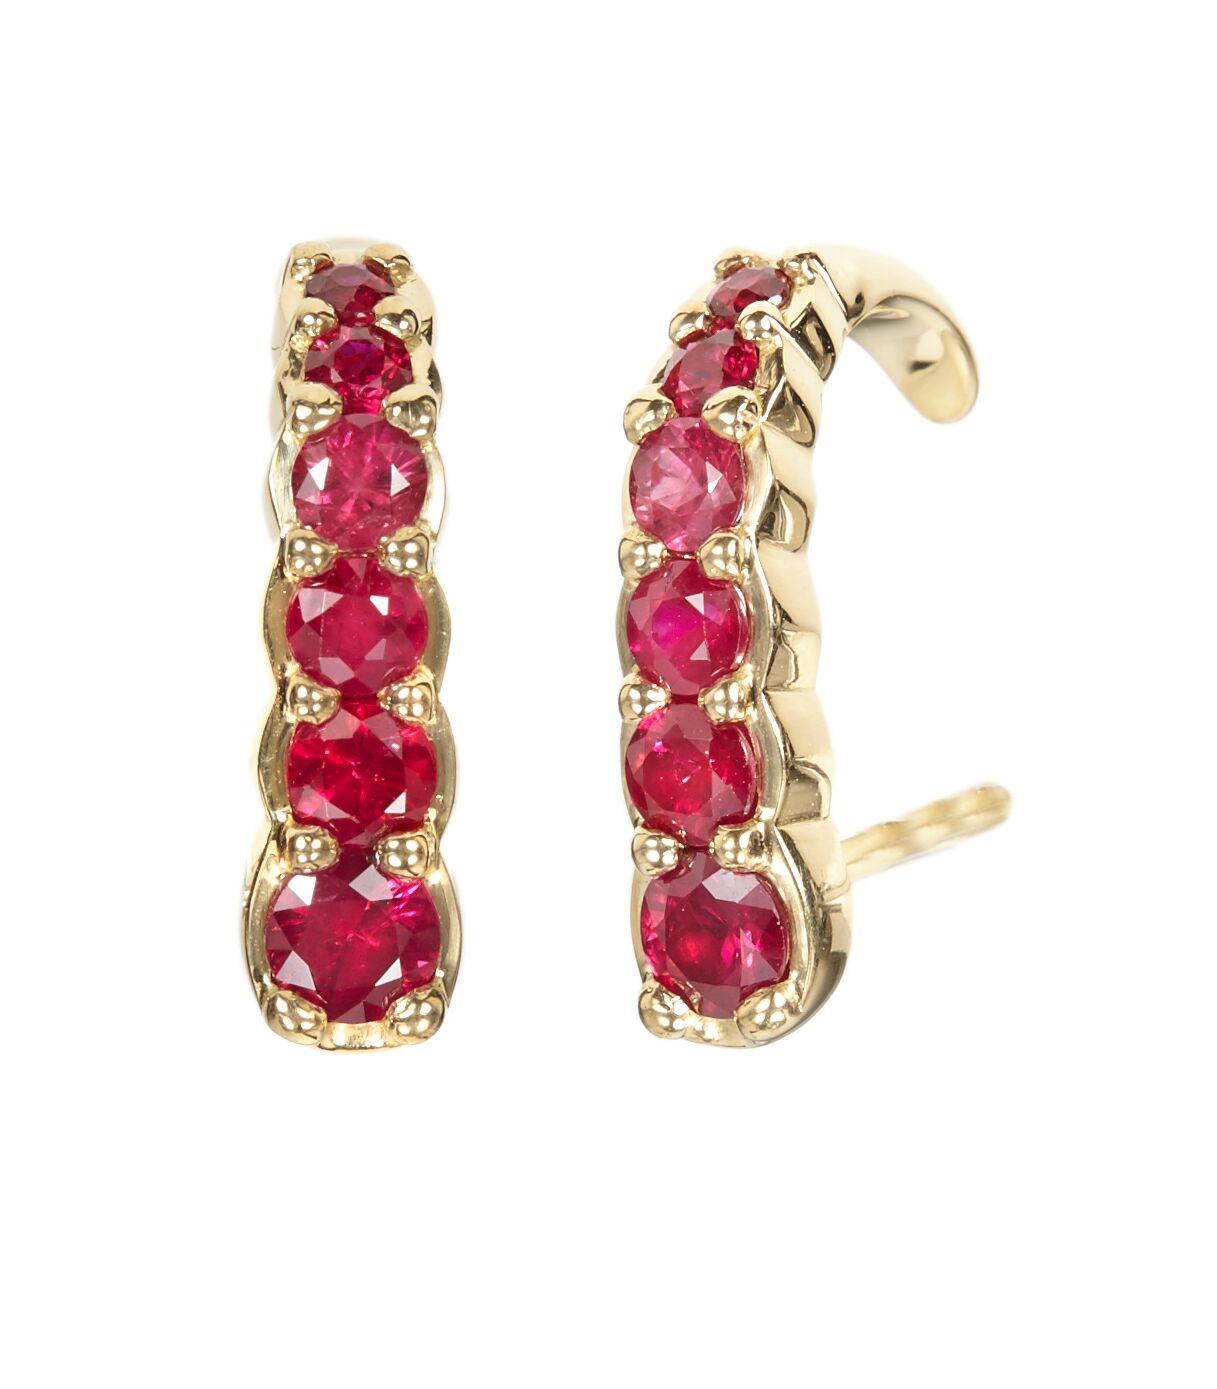 18k Yellow Gold, Rubies (1,79ct in total)
Ref: EA223-6
Elegant piece, for special evening or everyday wear. Ruby is a symbol of good fortune, pure love, and loyalty.
*If you require any bespoke changes (different type of metal/gemstones/cut/sizing)